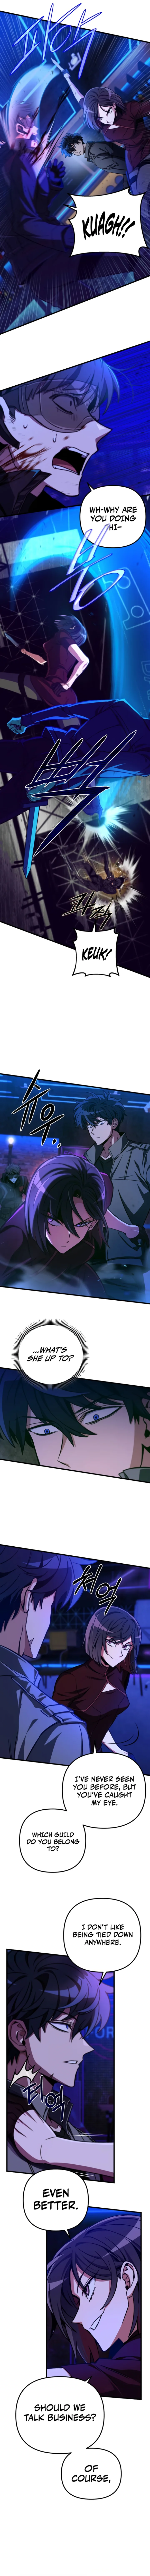 The Genius Assassin Who Takes it All - Chapter 12 Page 2